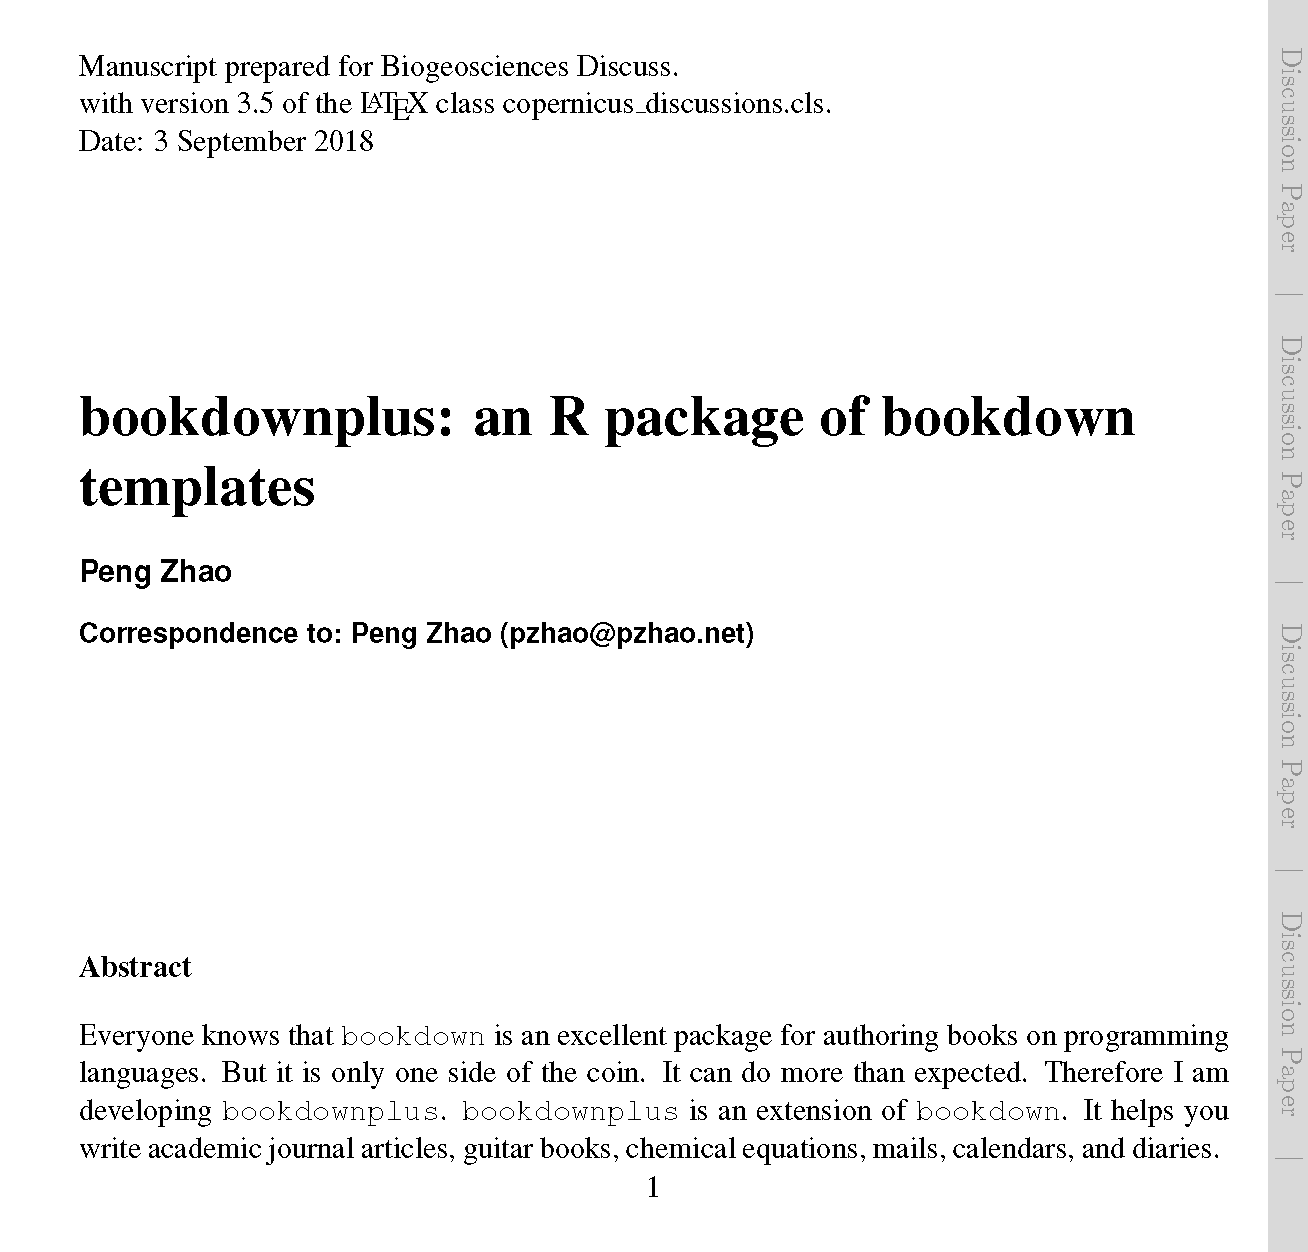 Bookdown contest submission: a template for Copernicus academic